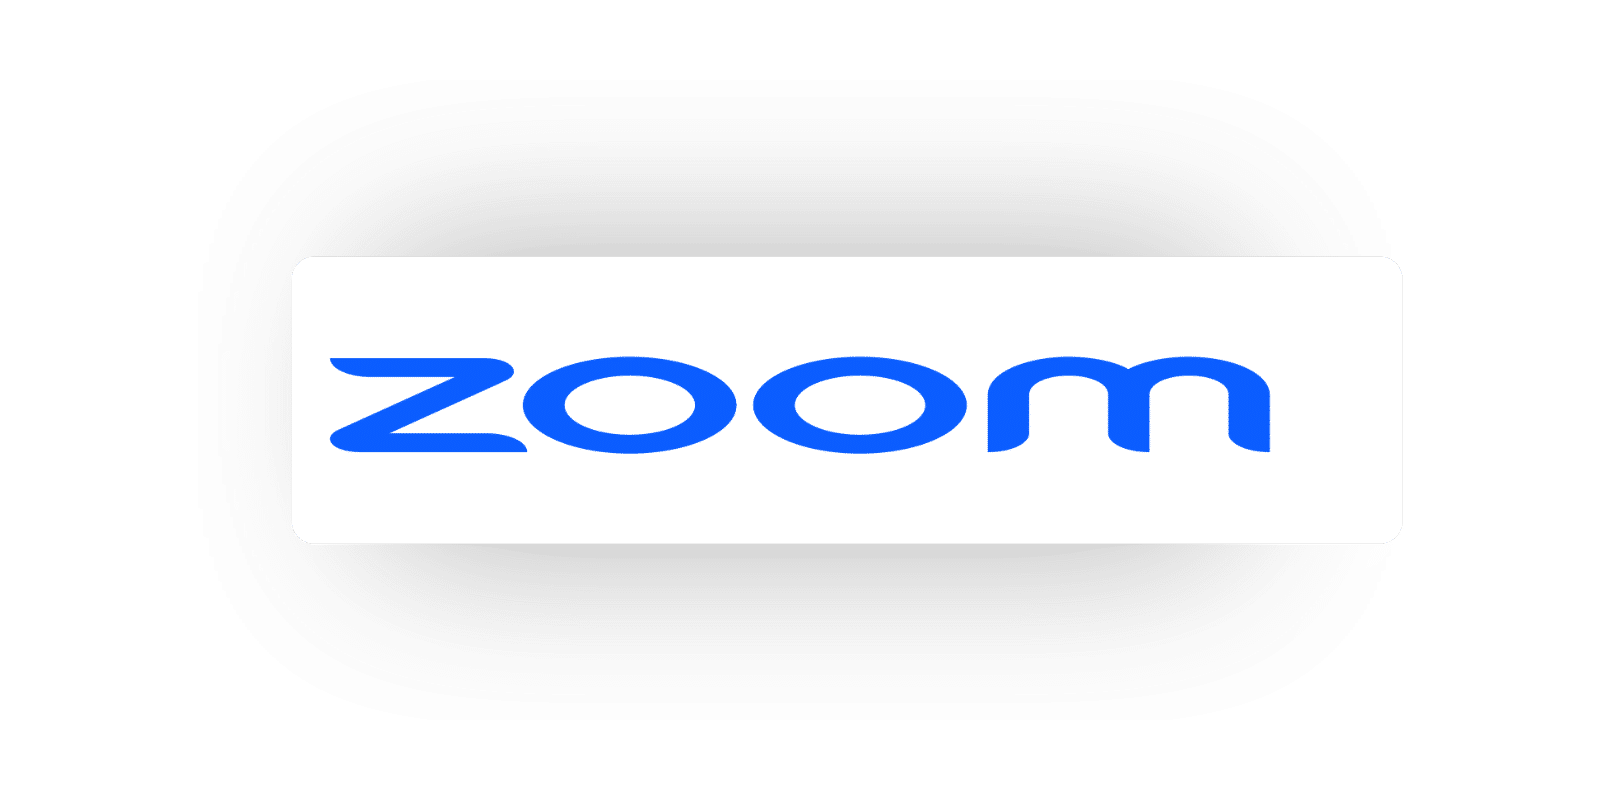 By integrating Zoom conferencing and webinar technology in our training solution, our customers can easily schedule, host, record, edit, and track all of their webinars using a company-branded Virtual Classroom.